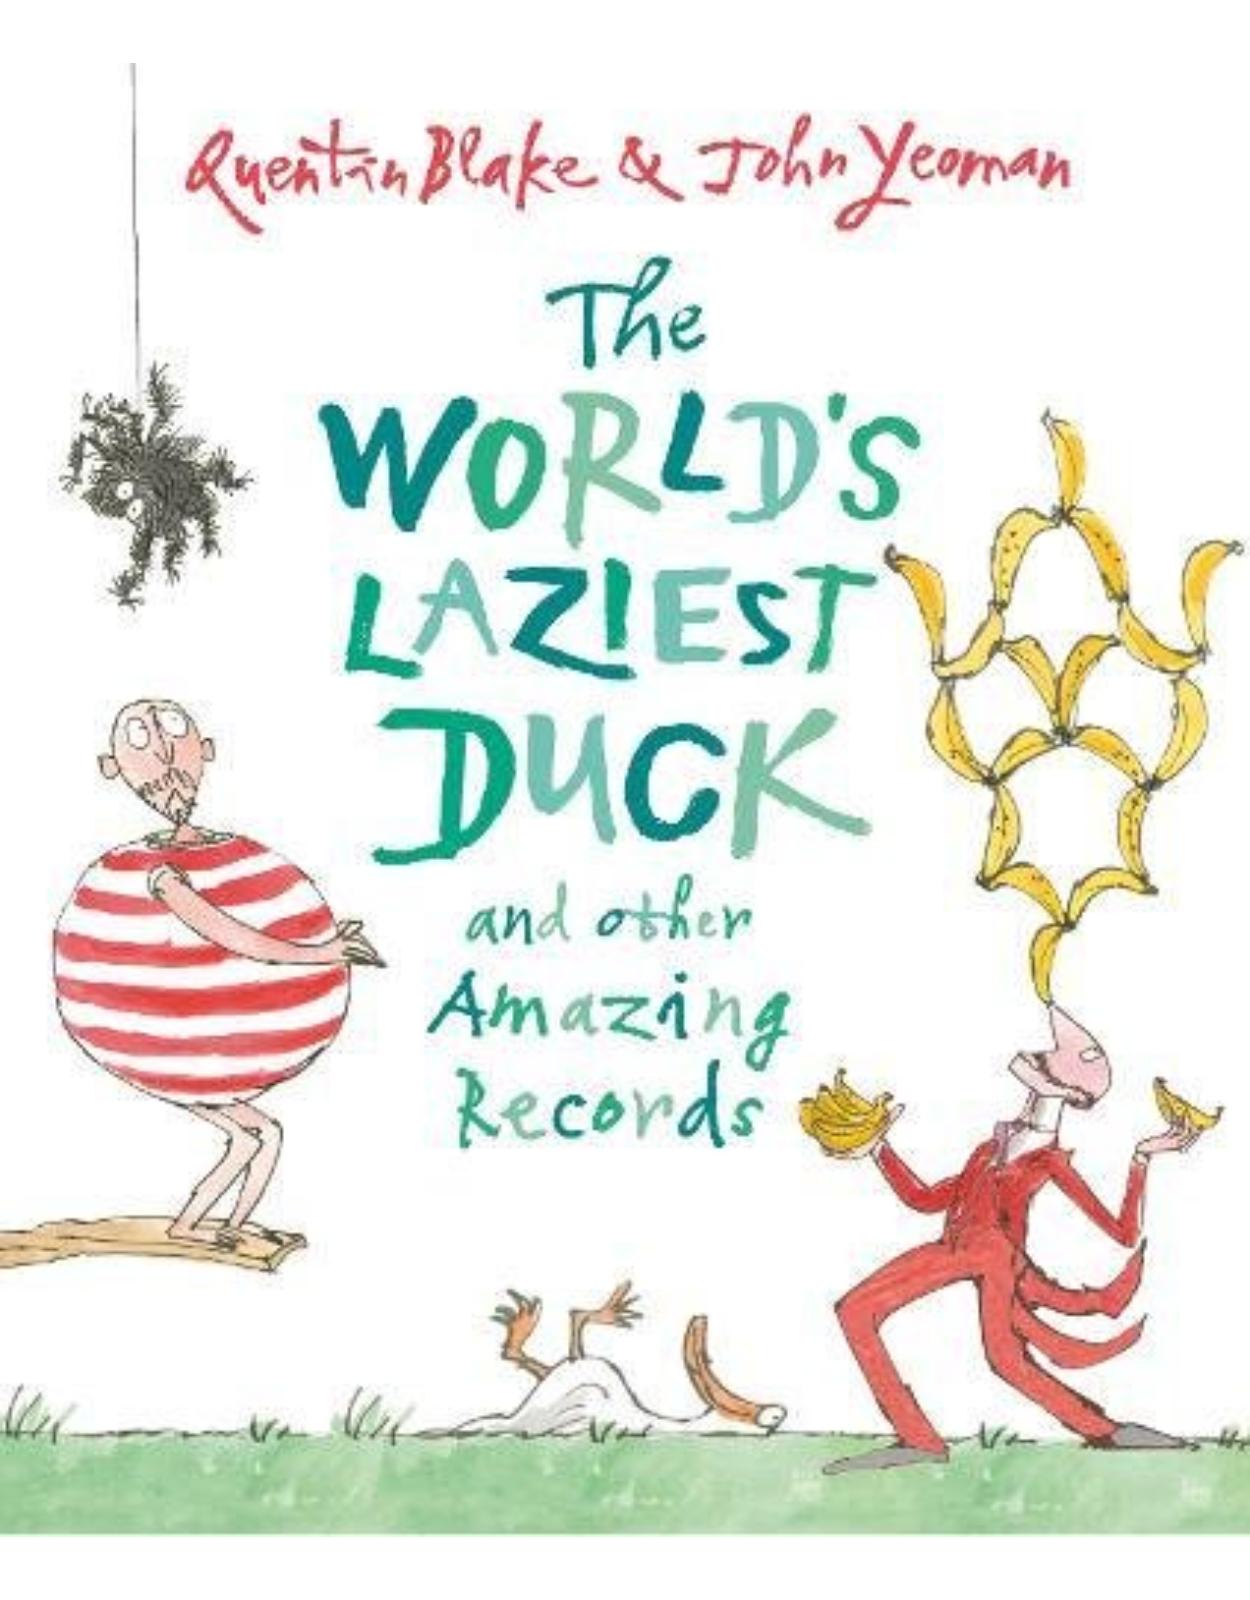 The World's Laziest Duck: and other Amazing Records